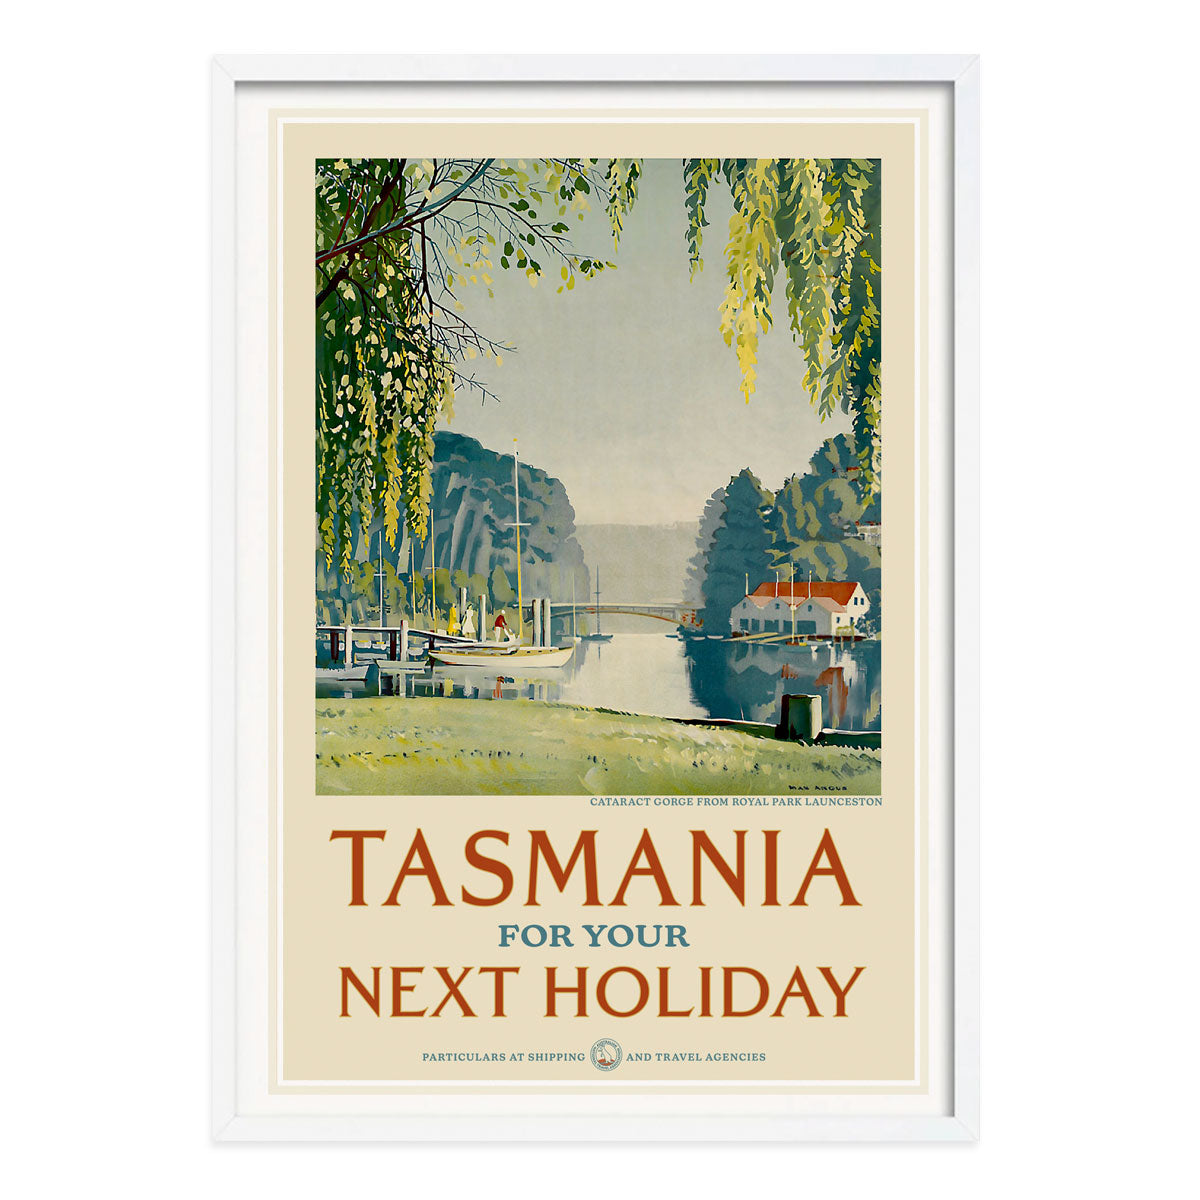 Tasmania nextholiday vintage advertising poster in white frame from Places We Luv